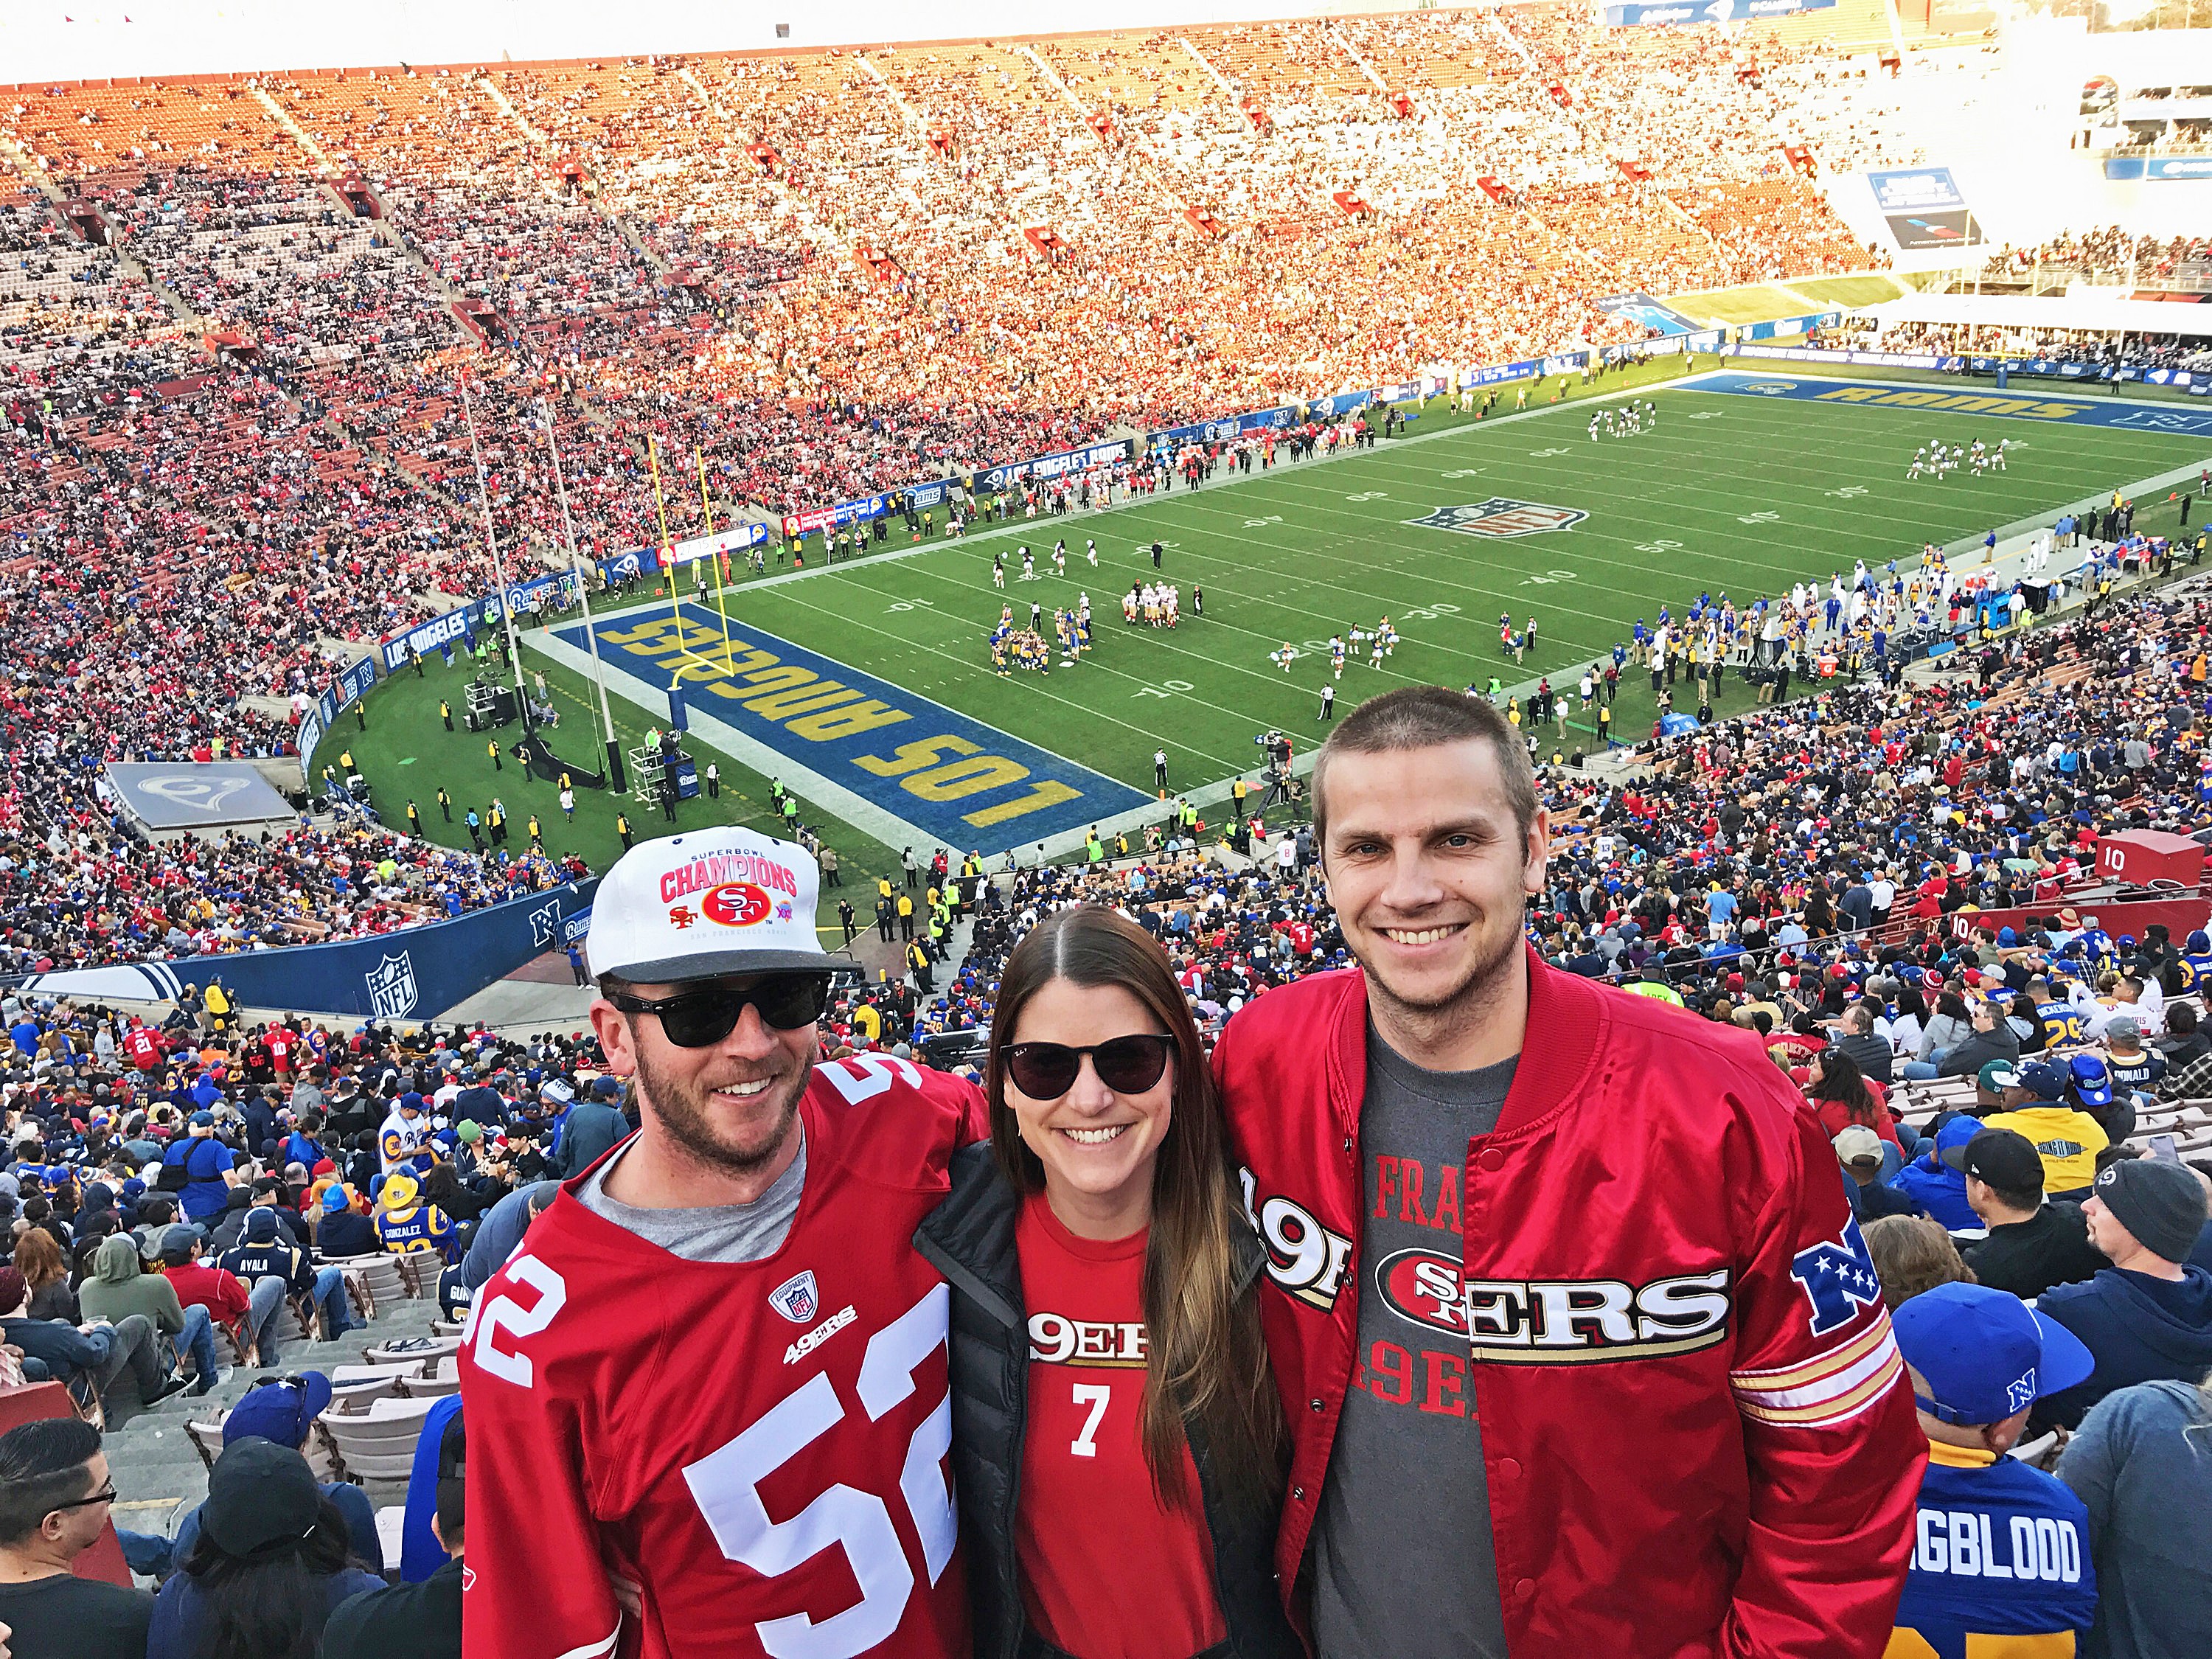 Spending New Year's Eve at the LA Coliseum for the 49ers vs. Rams game, Get Out, San Luis Obispo